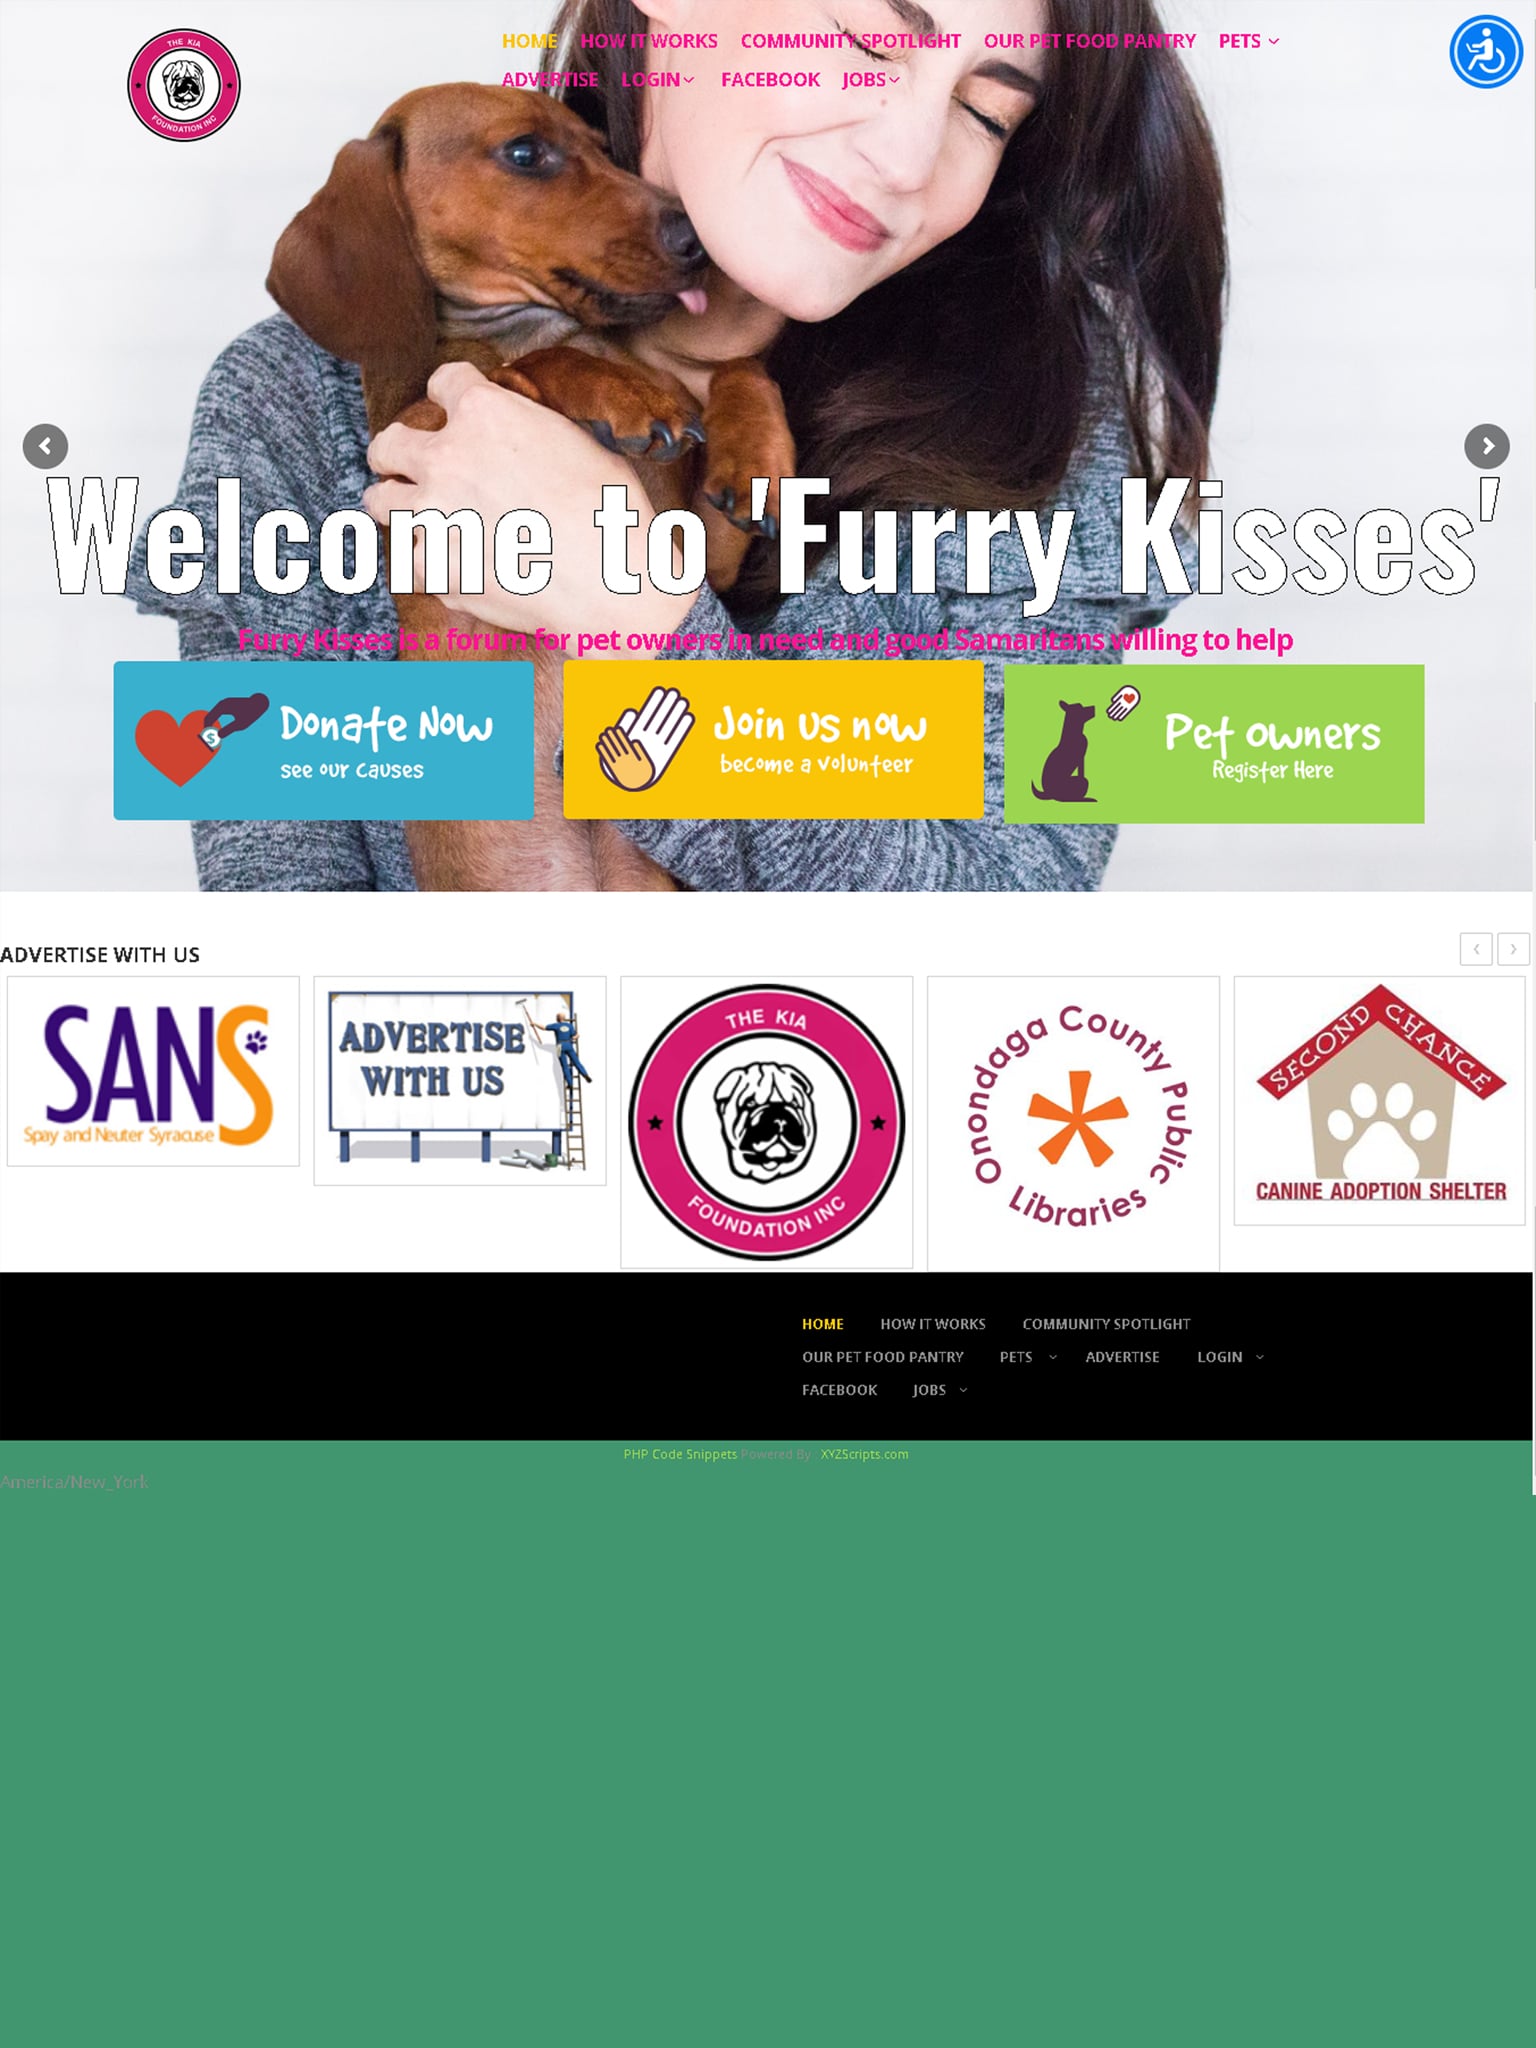 Helping Pets Their Owners Transportation Services FurryKisses Ipad